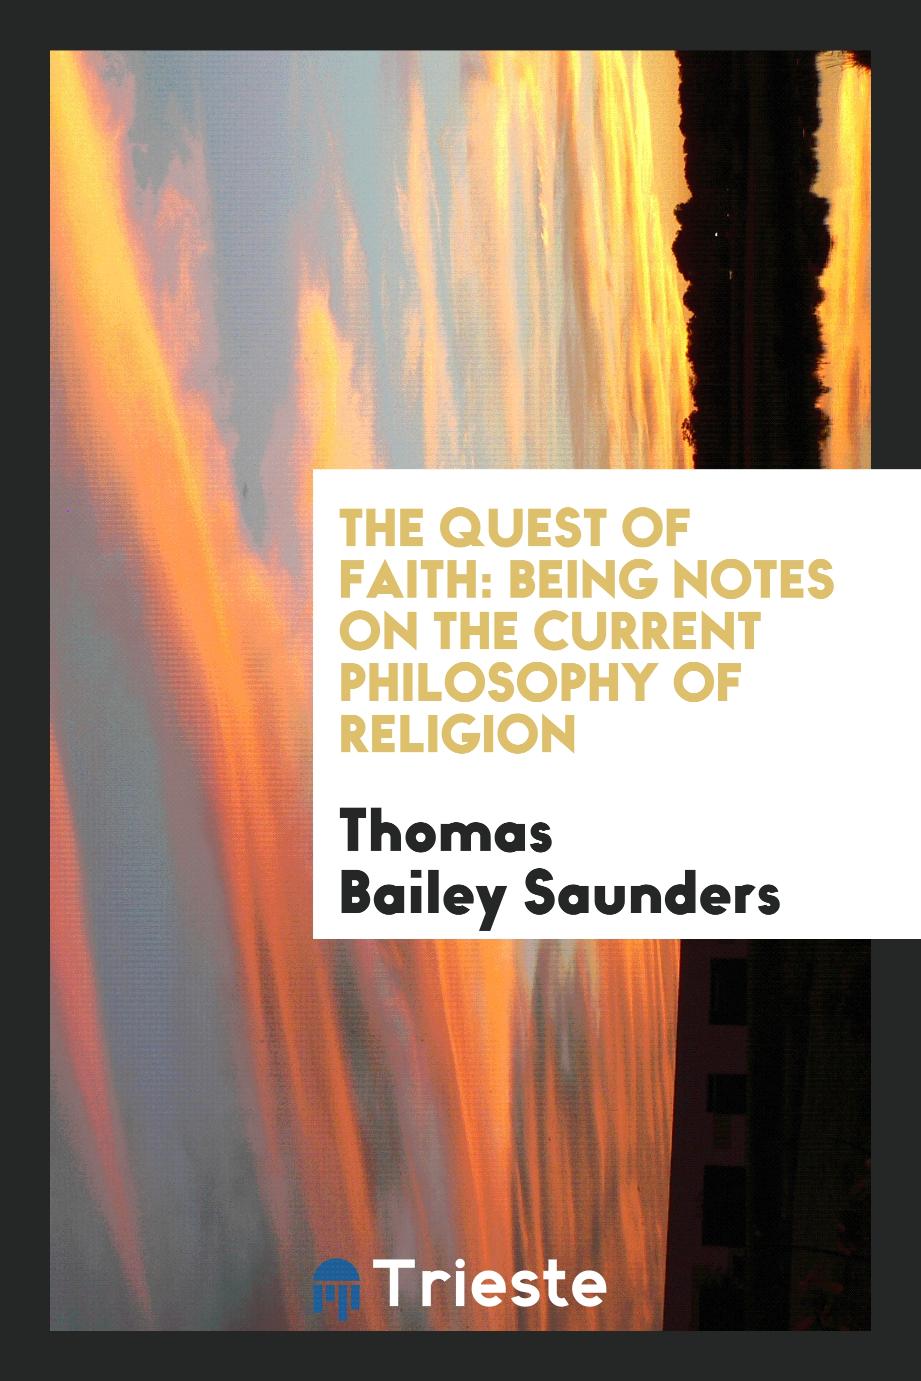 The Quest of Faith: Being Notes on the Current Philosophy of Religion